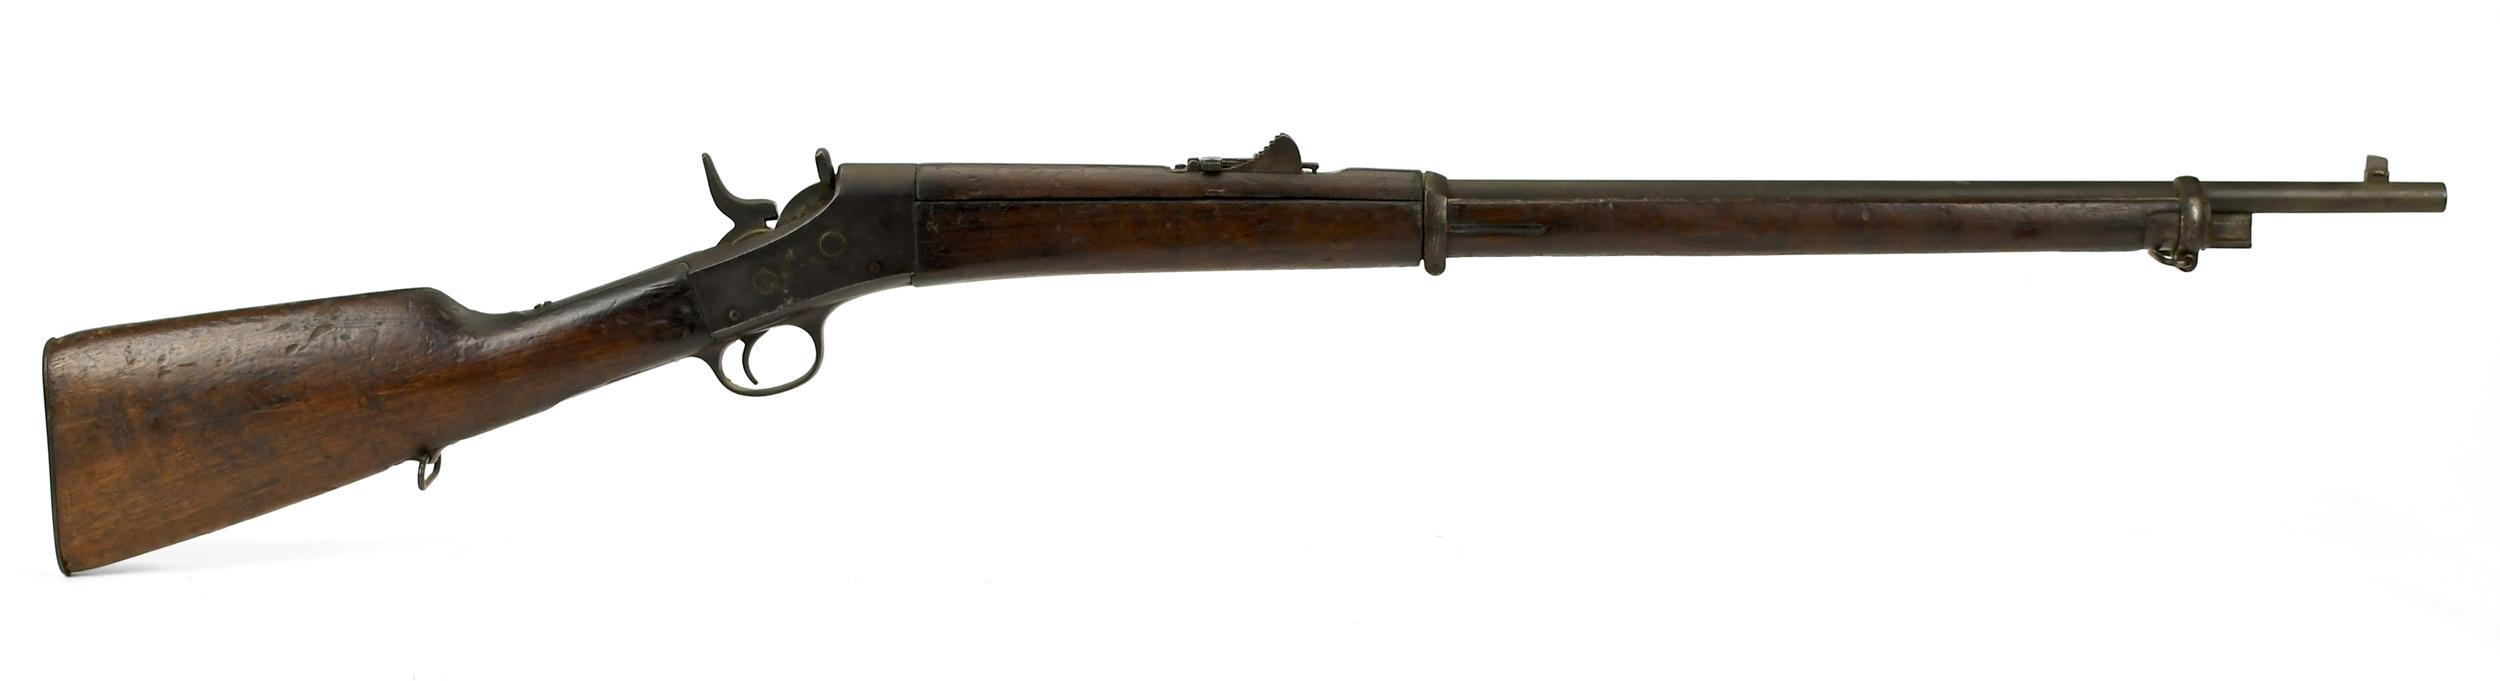 19TH C. ROLLING BLOCK RIFLE. A 19th